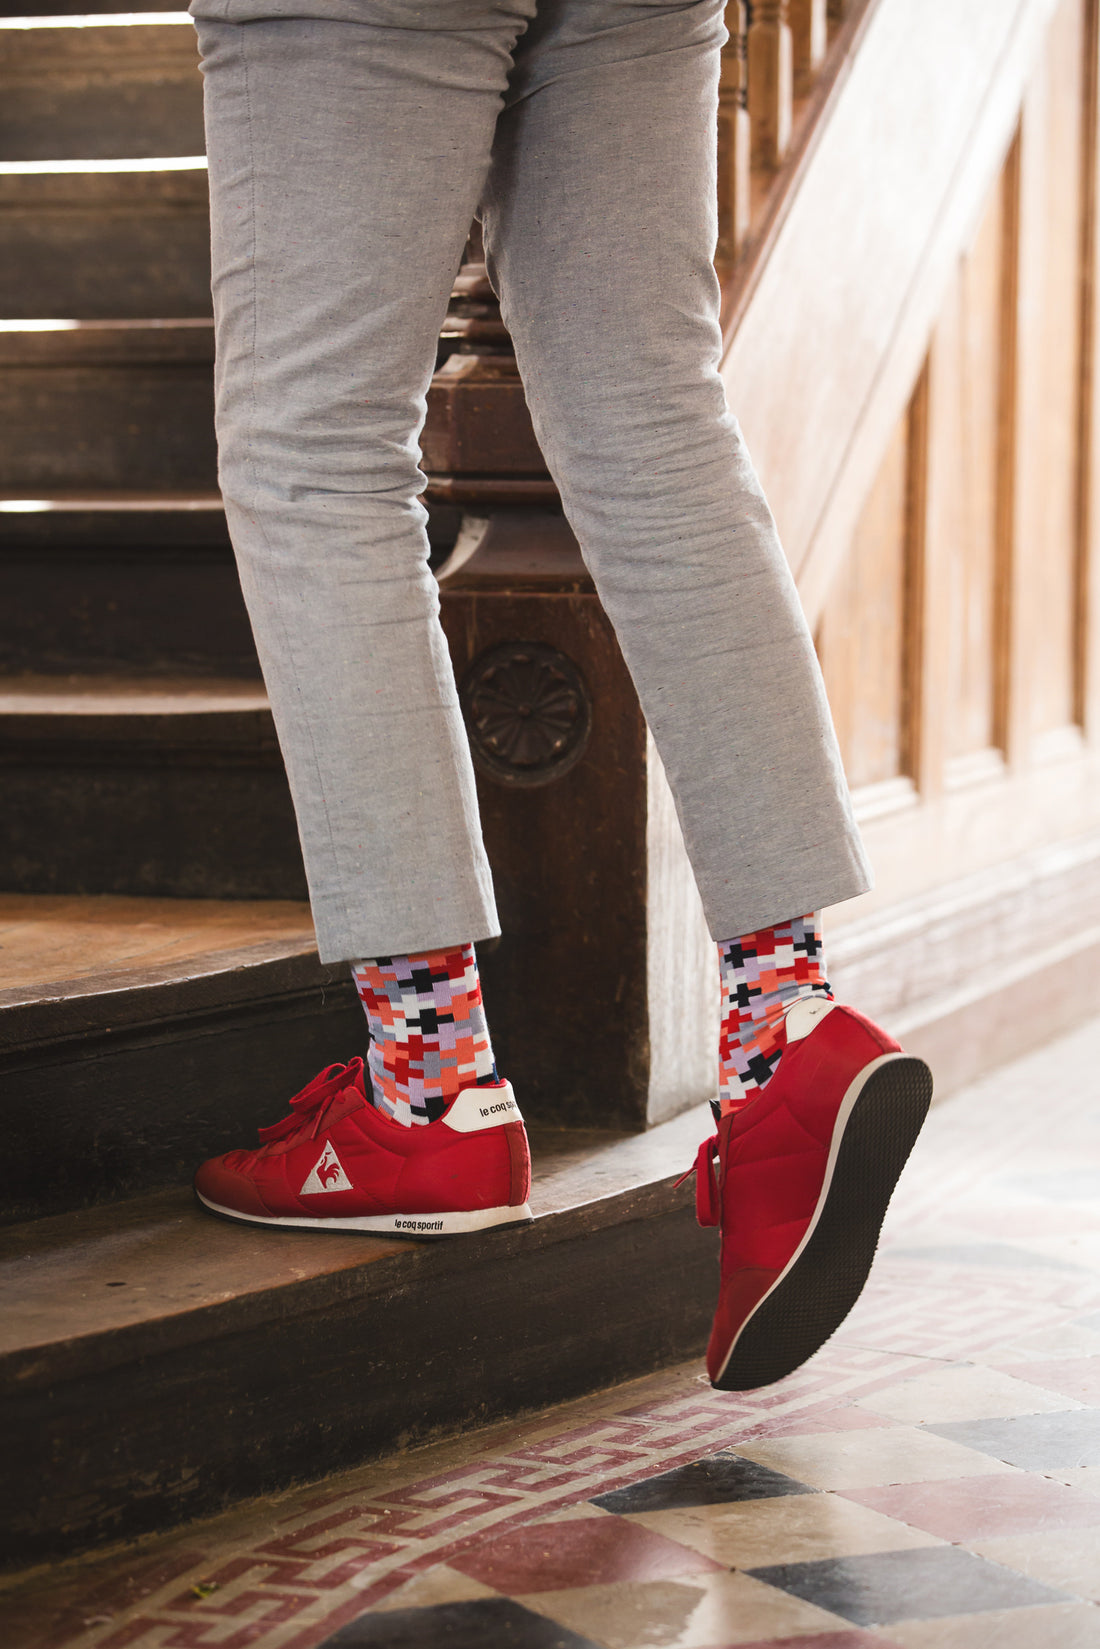 5 Accessories To Match with Your Socks That Will Help You Get Noticed